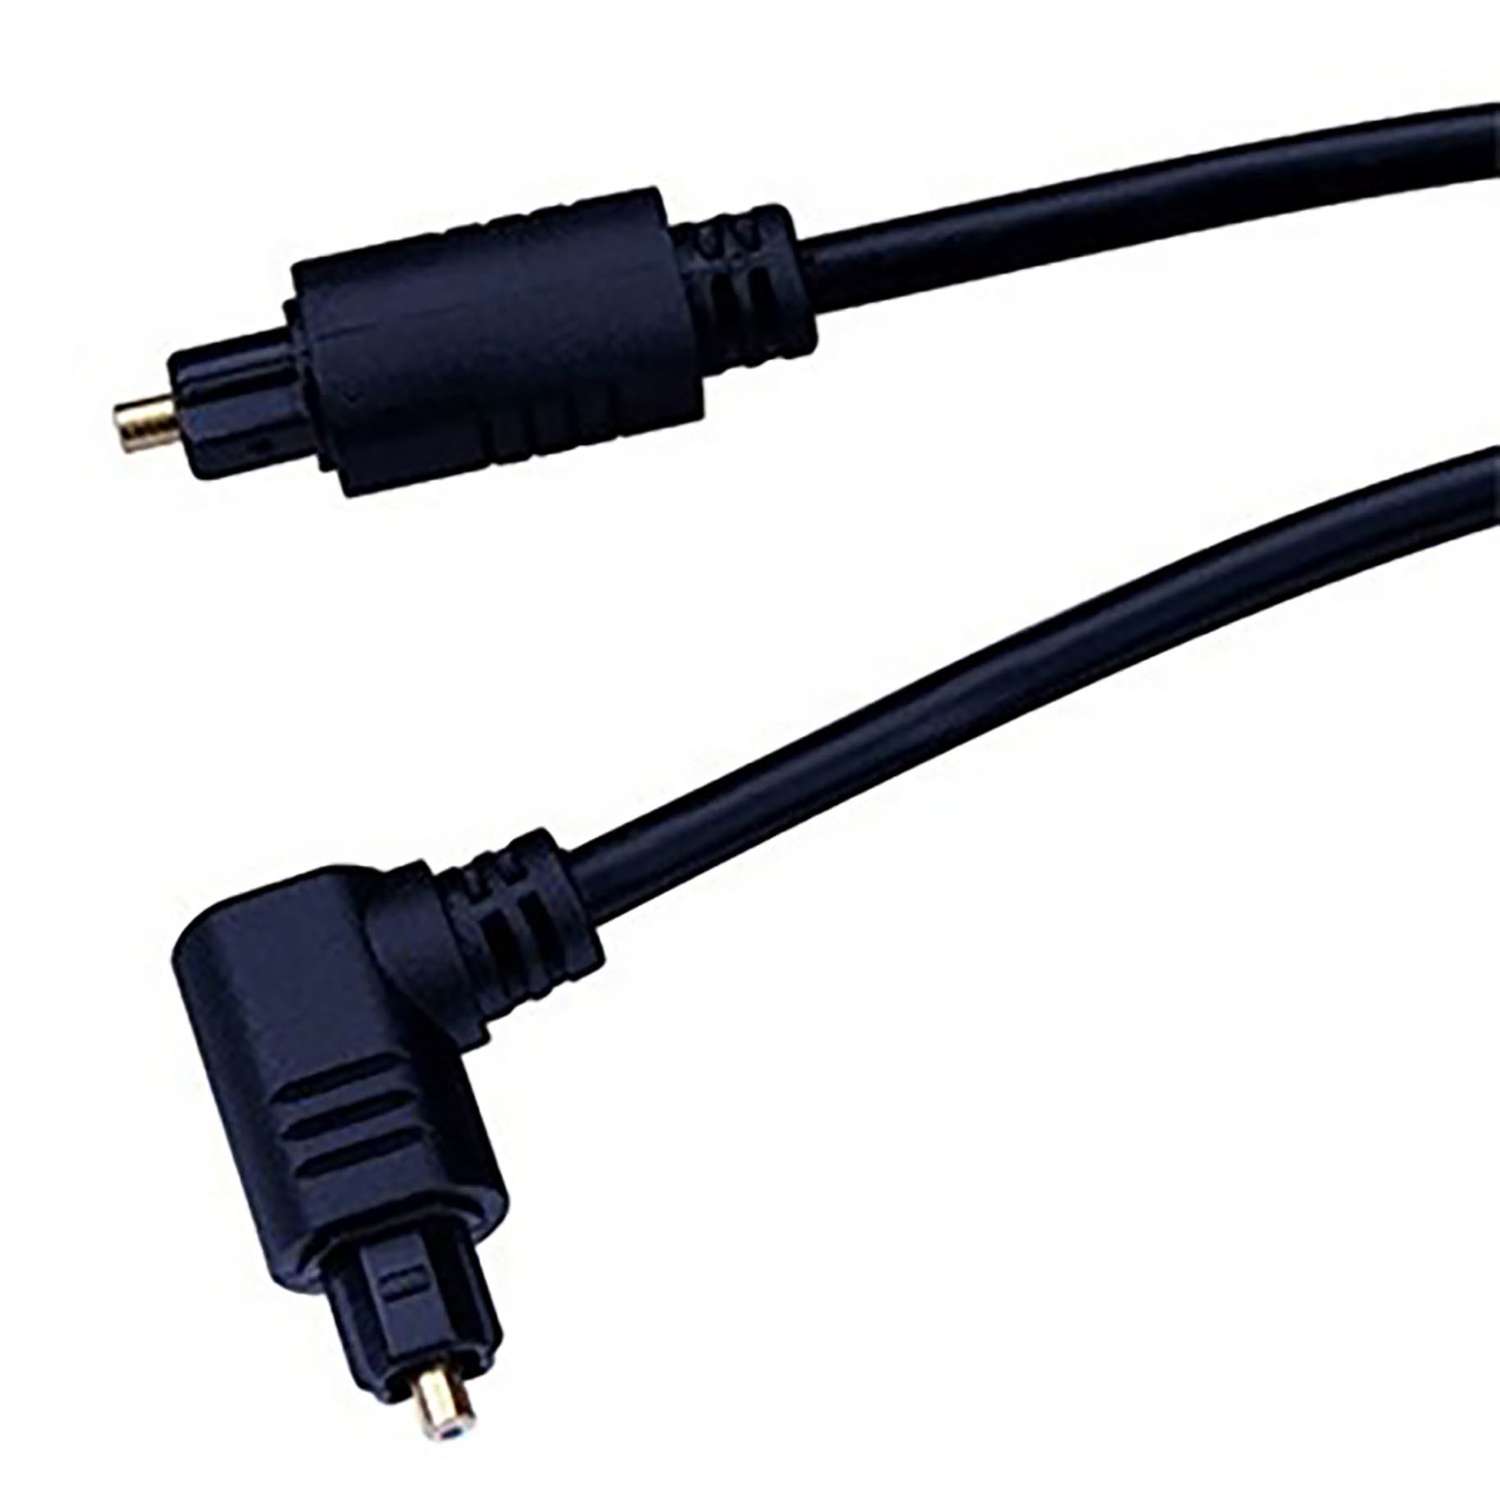 6' Digital Optical Audio Toslink Cable